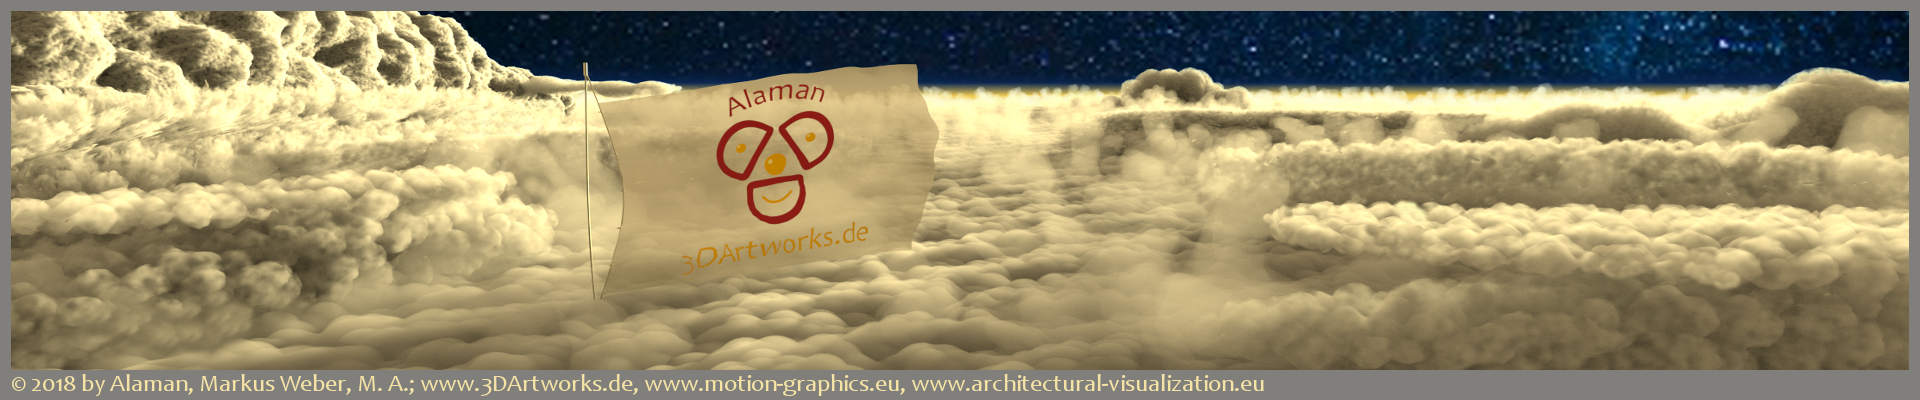 Logos: banner with the Alaman 3D Artworks logo in front of clouds